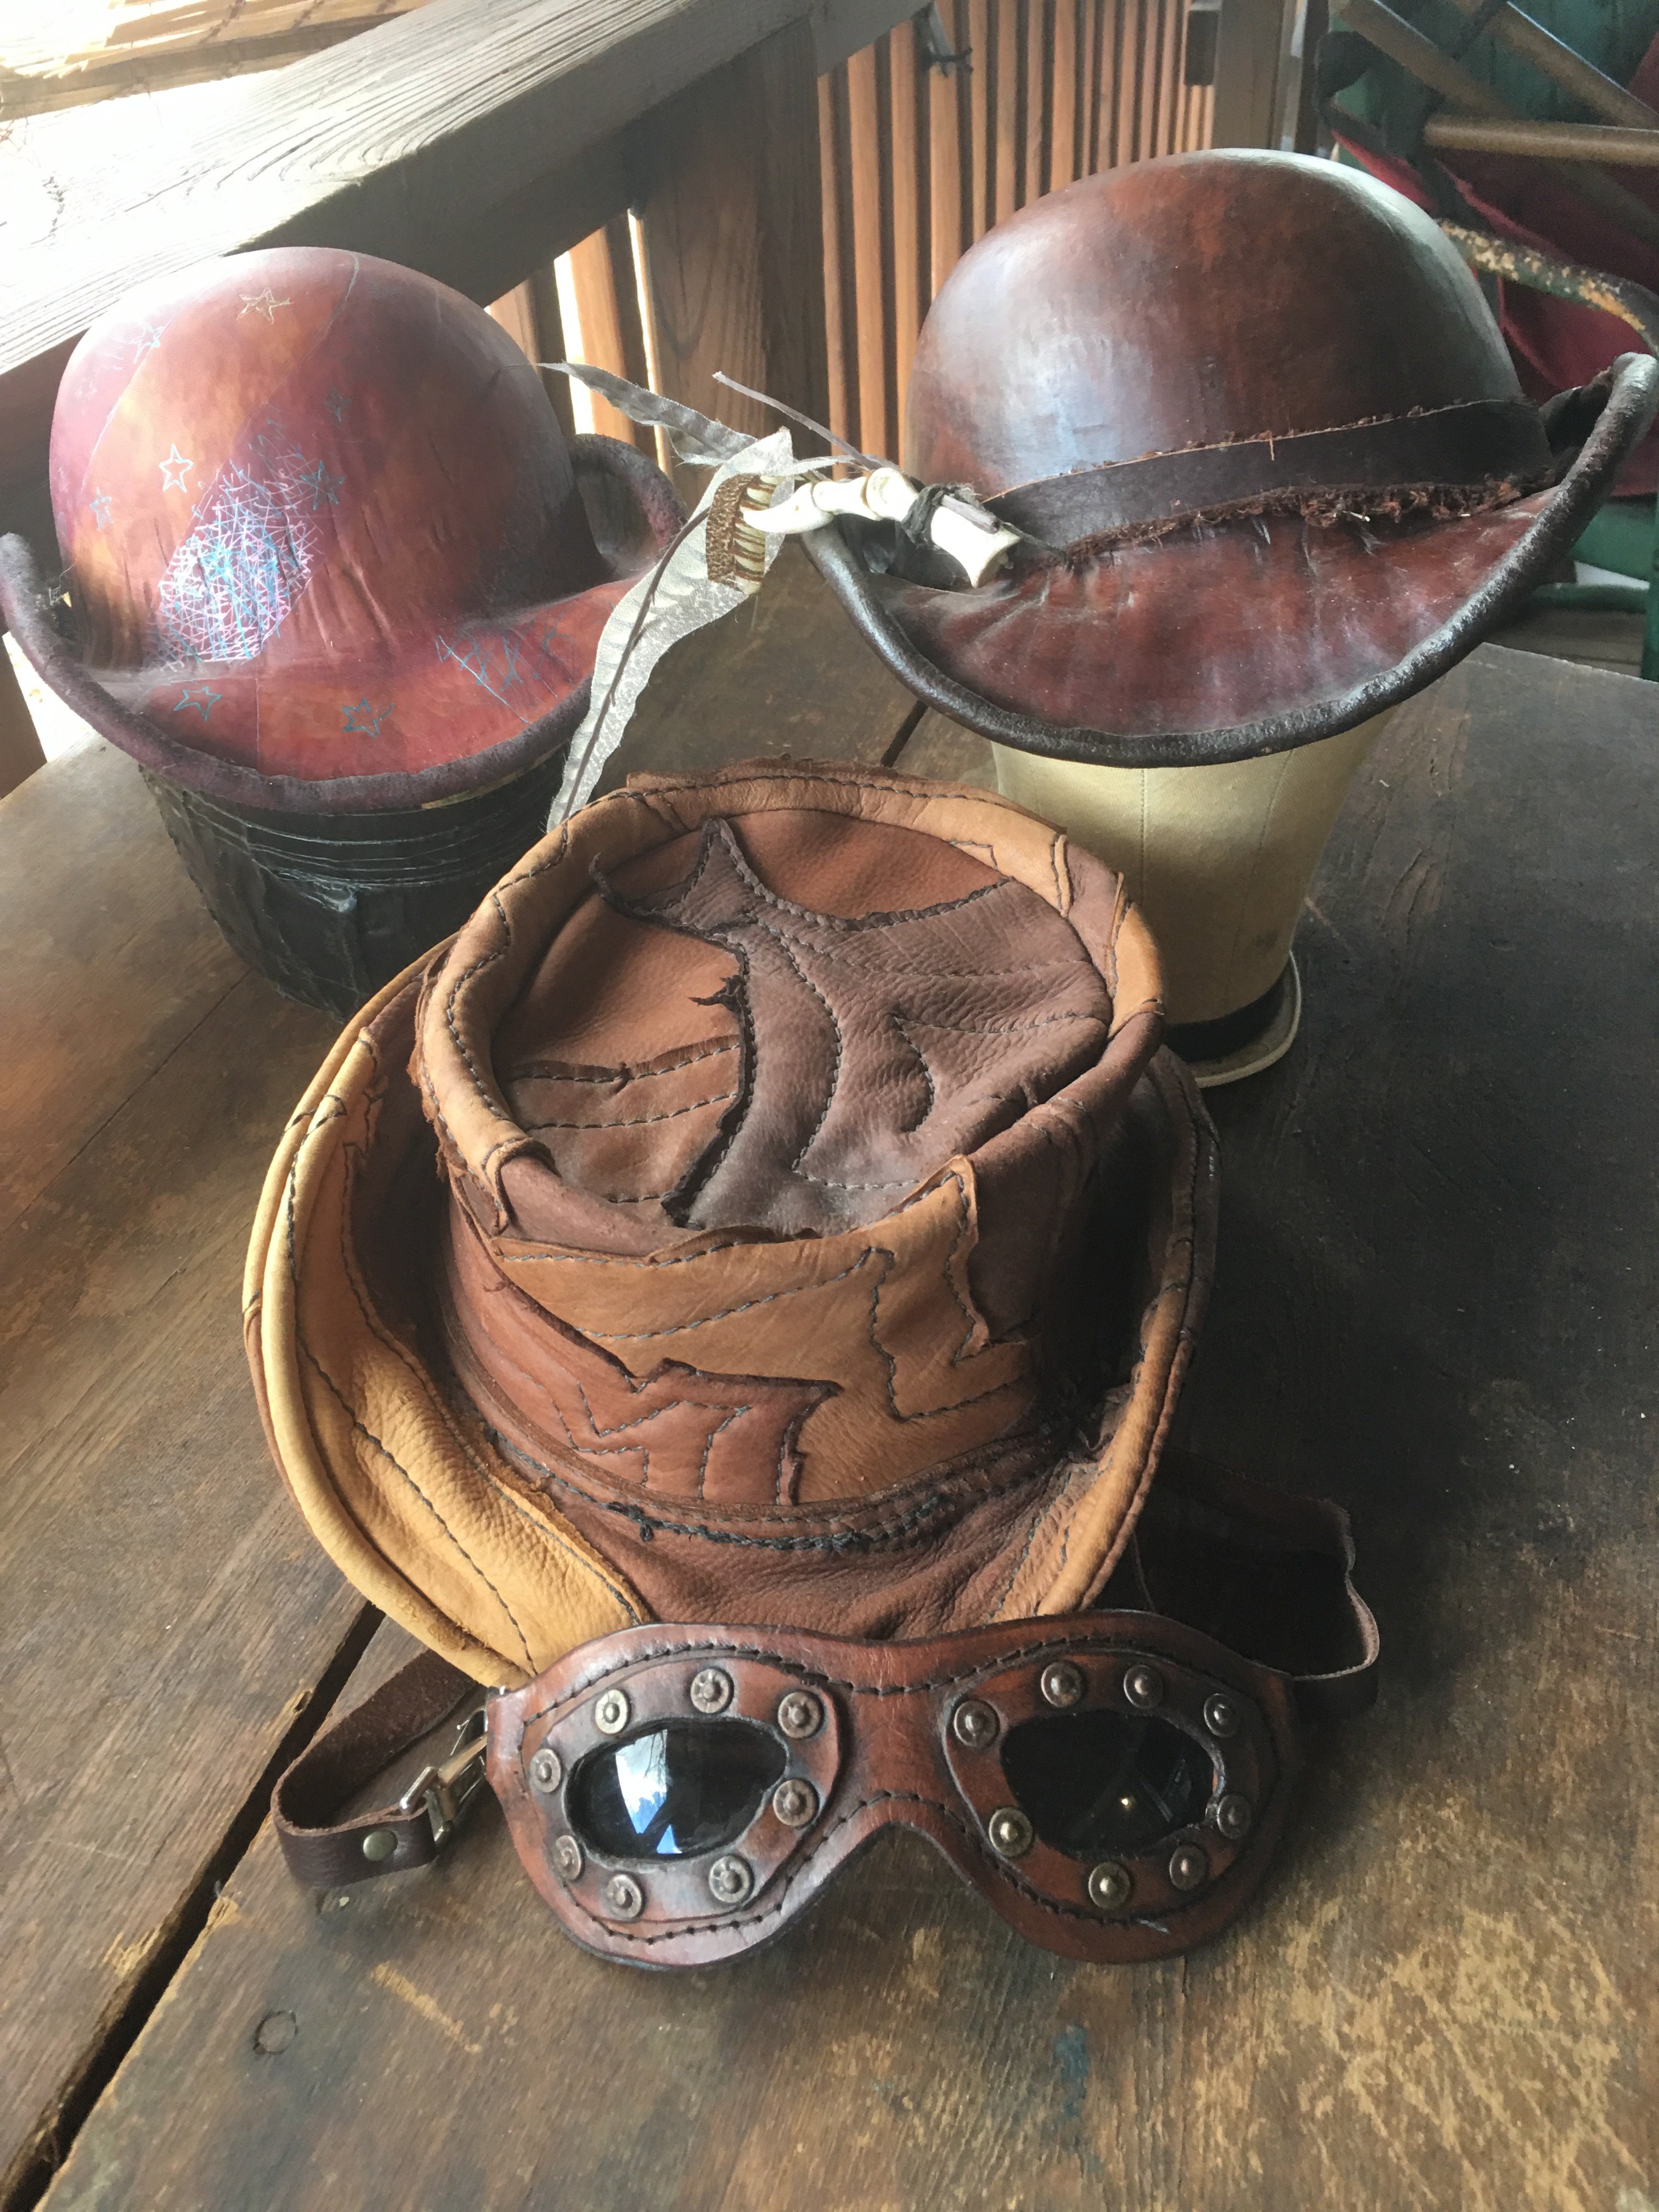 MakerFaire X: "Come experience Hat at Maker Faire! Tracy is an eclectic artist who's been working in leather for the last 30 years, making hats and bags. Most